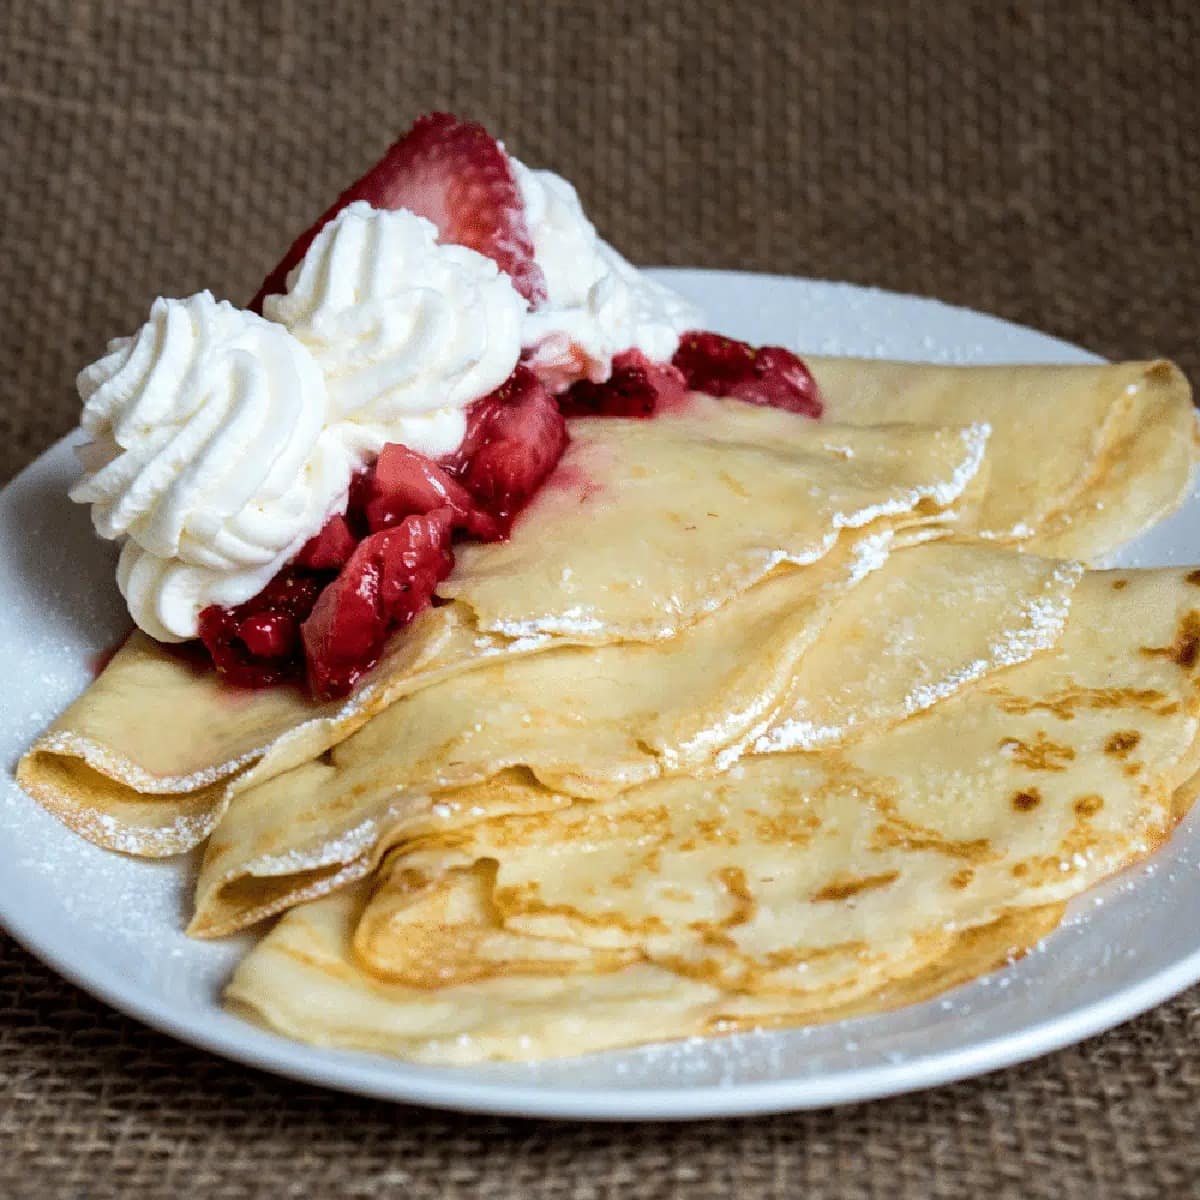 Stack of crepe with strawberries and whipped cream on top served on a plate